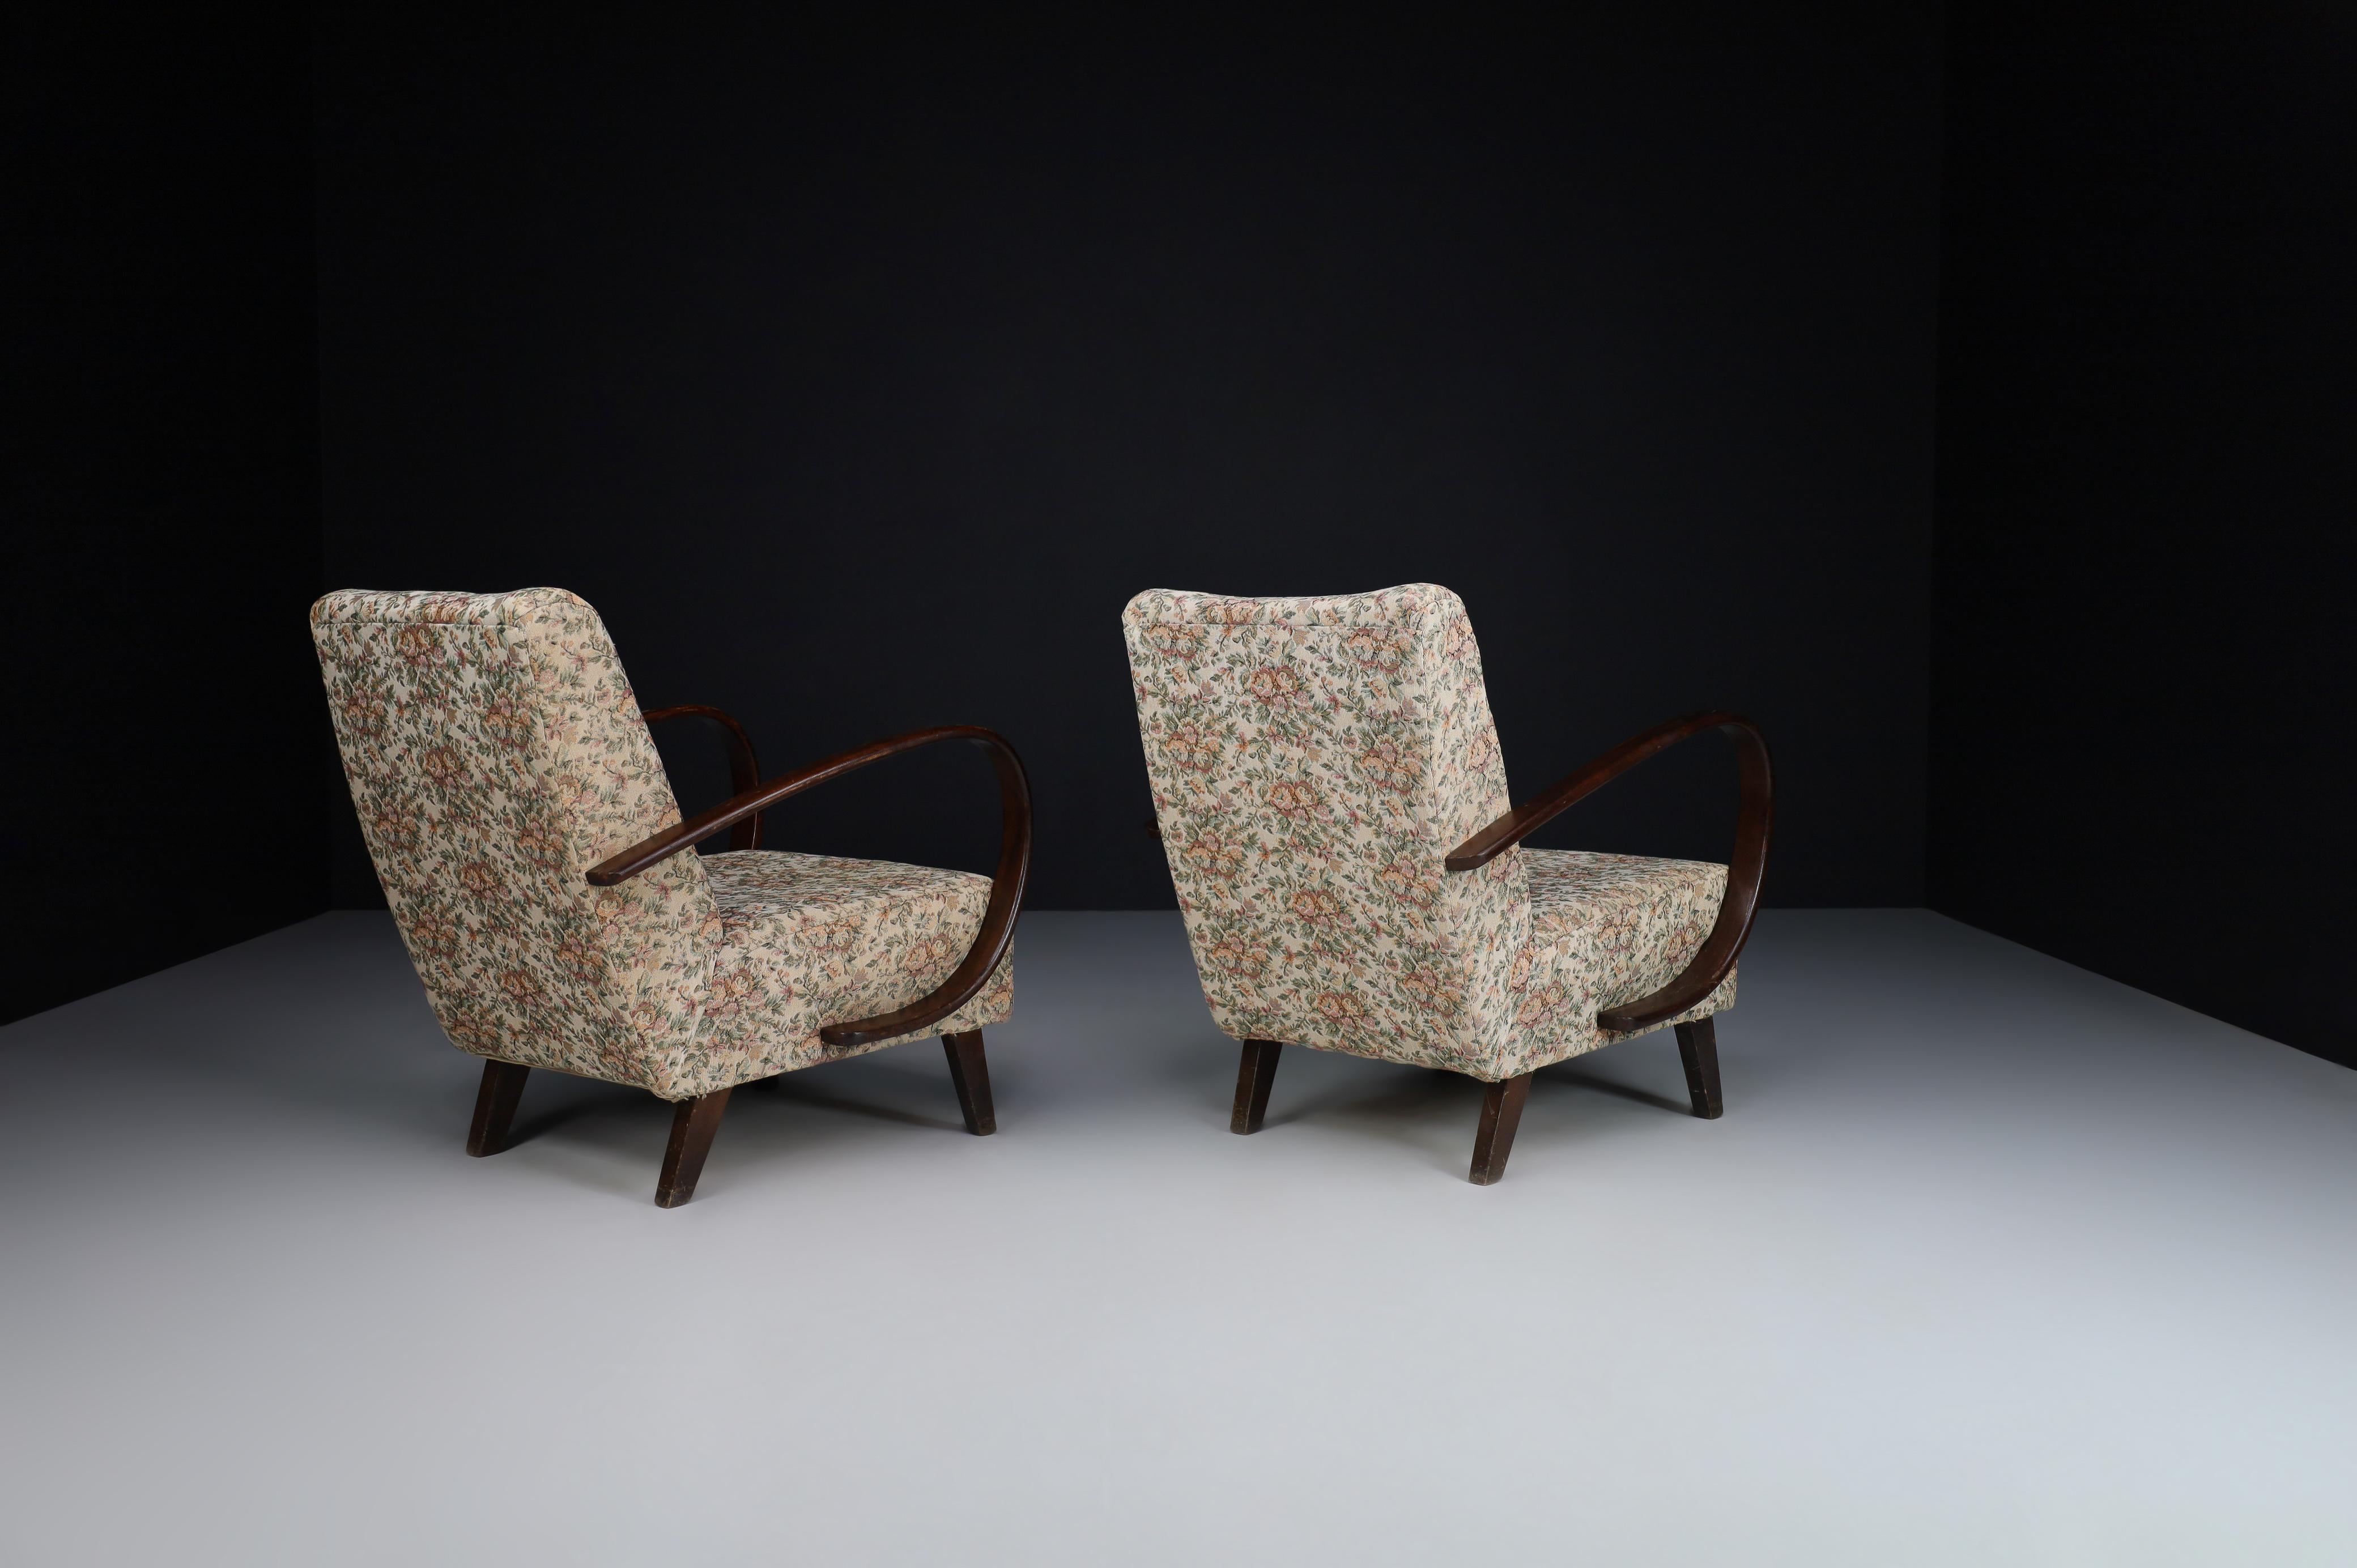 Czech Jindrich Halabala Bentwood Armchairs with Original Floral Upholstery, 1940s